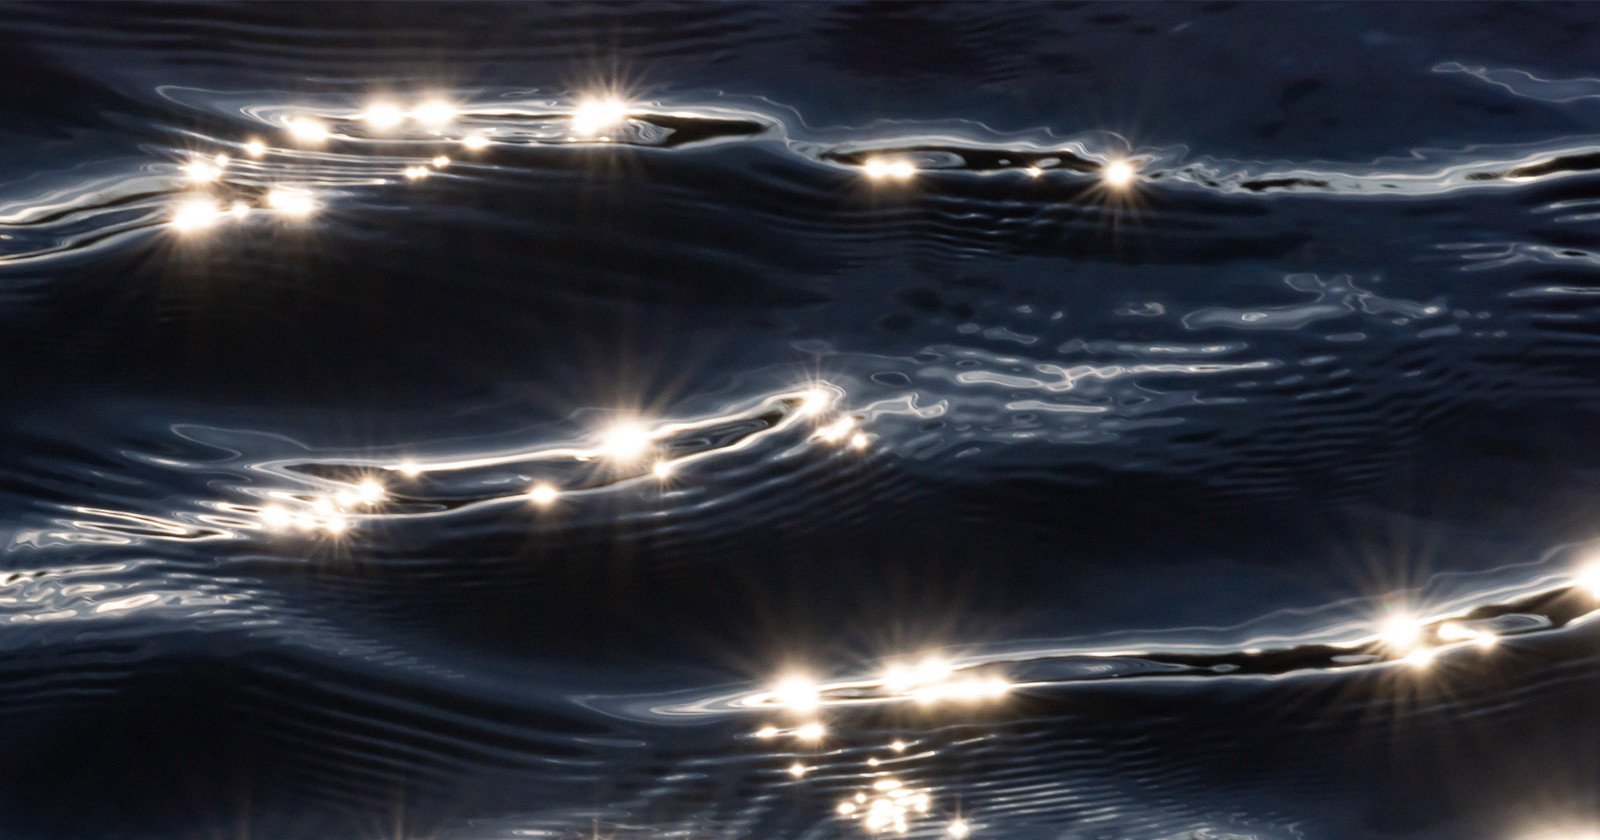 Ebb and Flow is a Calming Abstract Photo Series Featuring Water